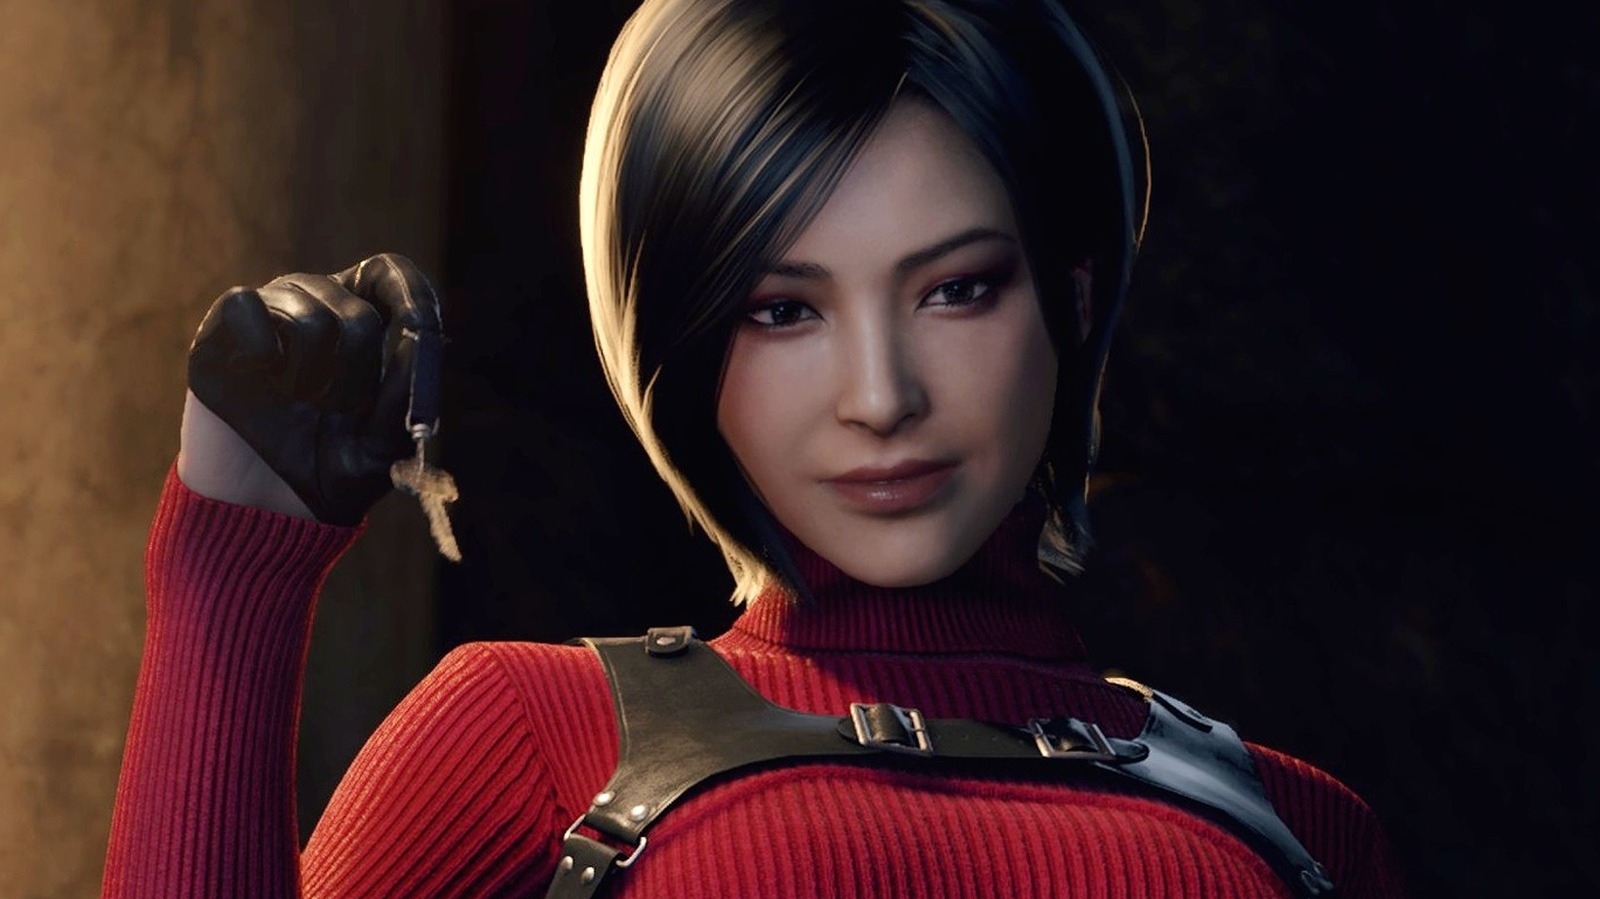 Download wallpaper 1080x2160 ada wong, video game, resident evil 2, 2018 game, honor 7x, honor 9 ...